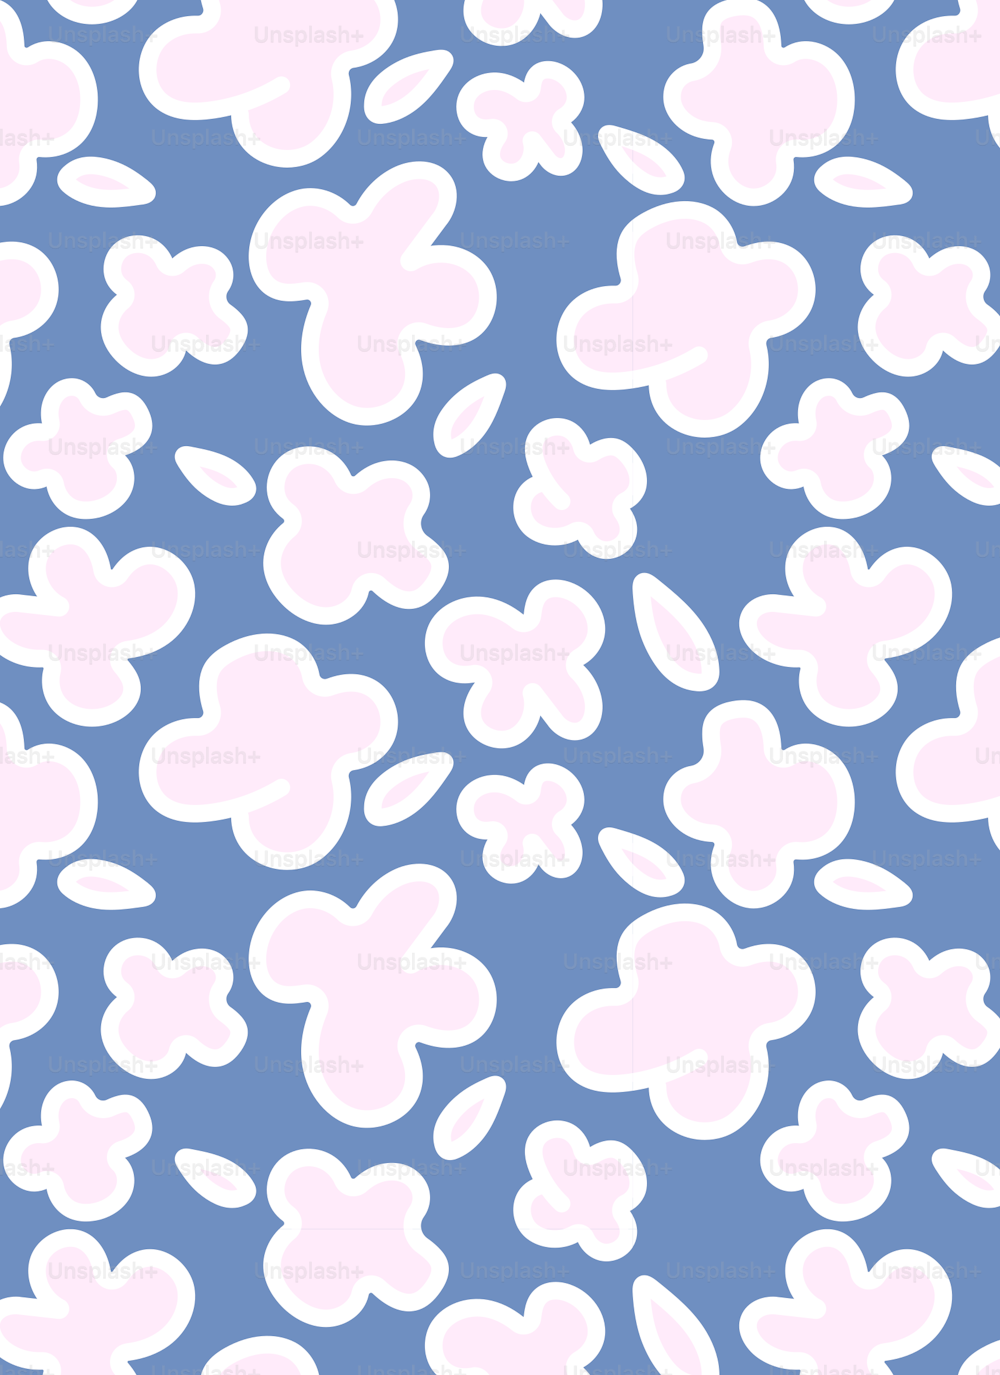 a blue and white pattern with hearts on it